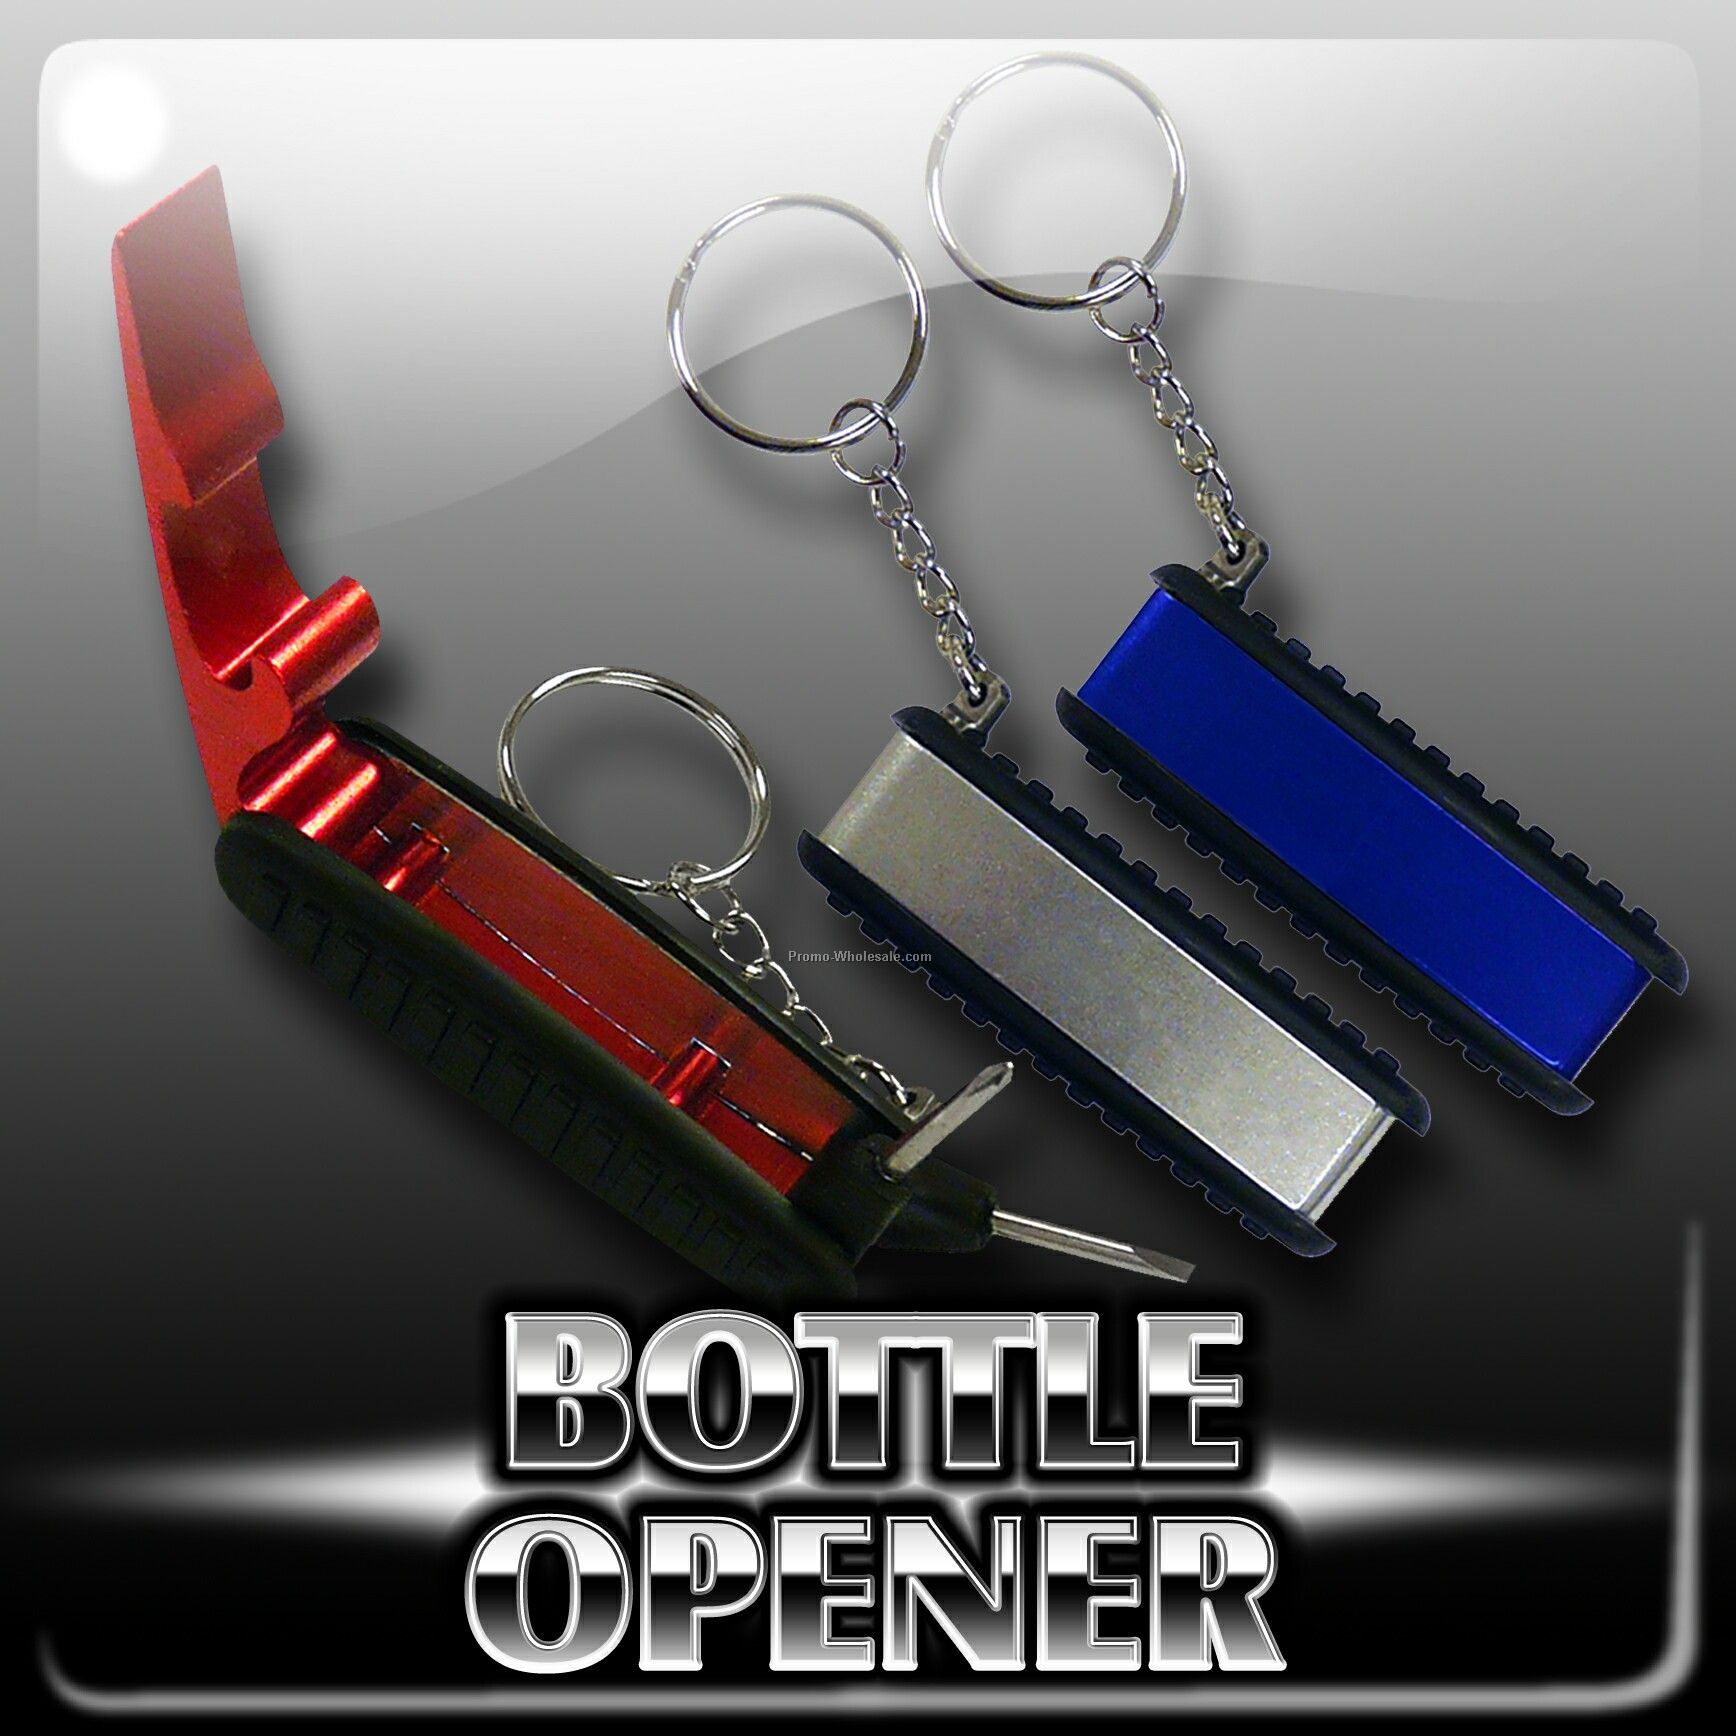 Bottle-opener Aluminum With Miniature Toolkit And Keychain